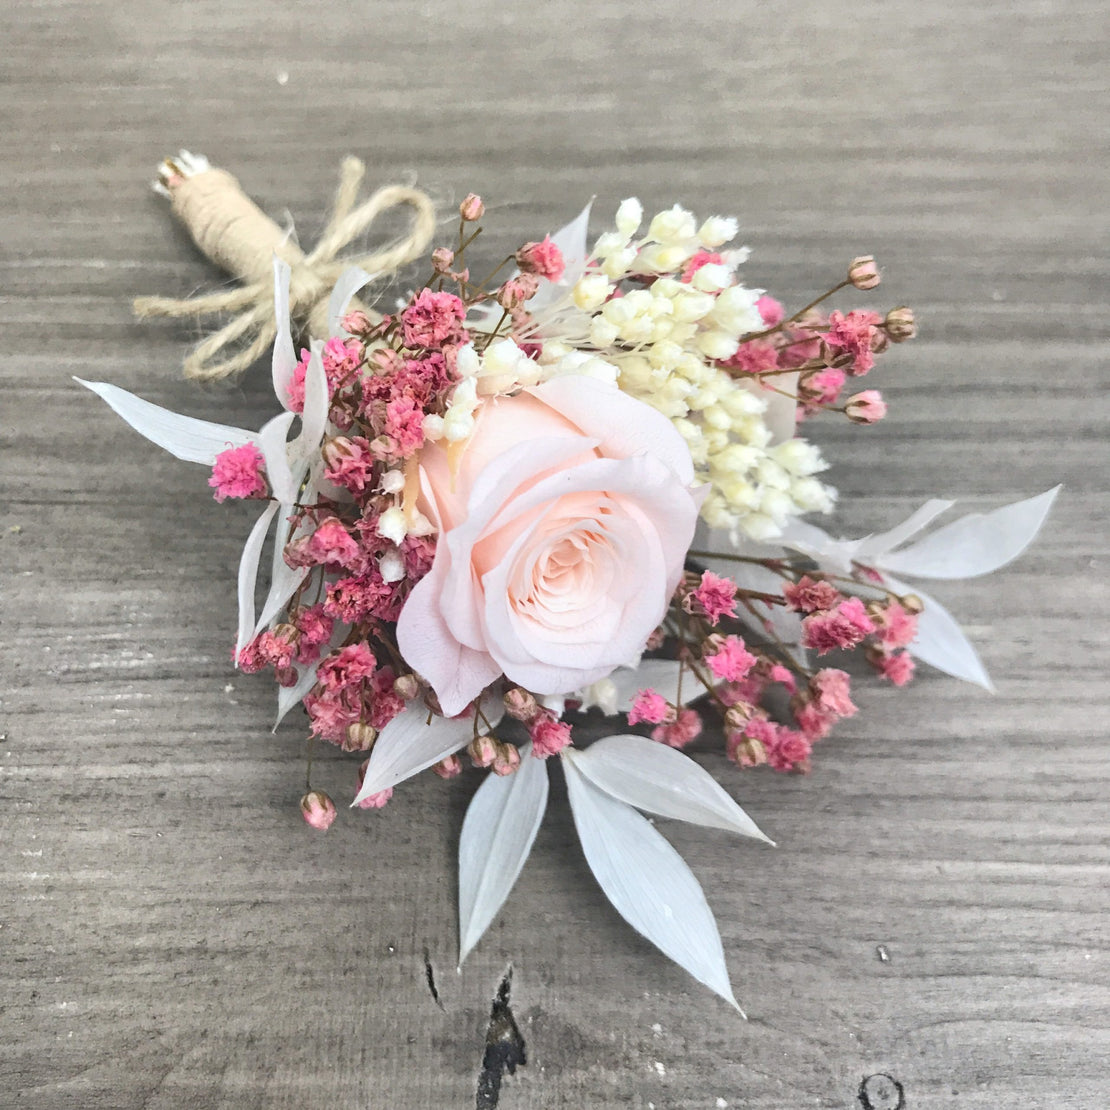 Dried flower wedding boutonniere with rose and stabilized pink gypsophila